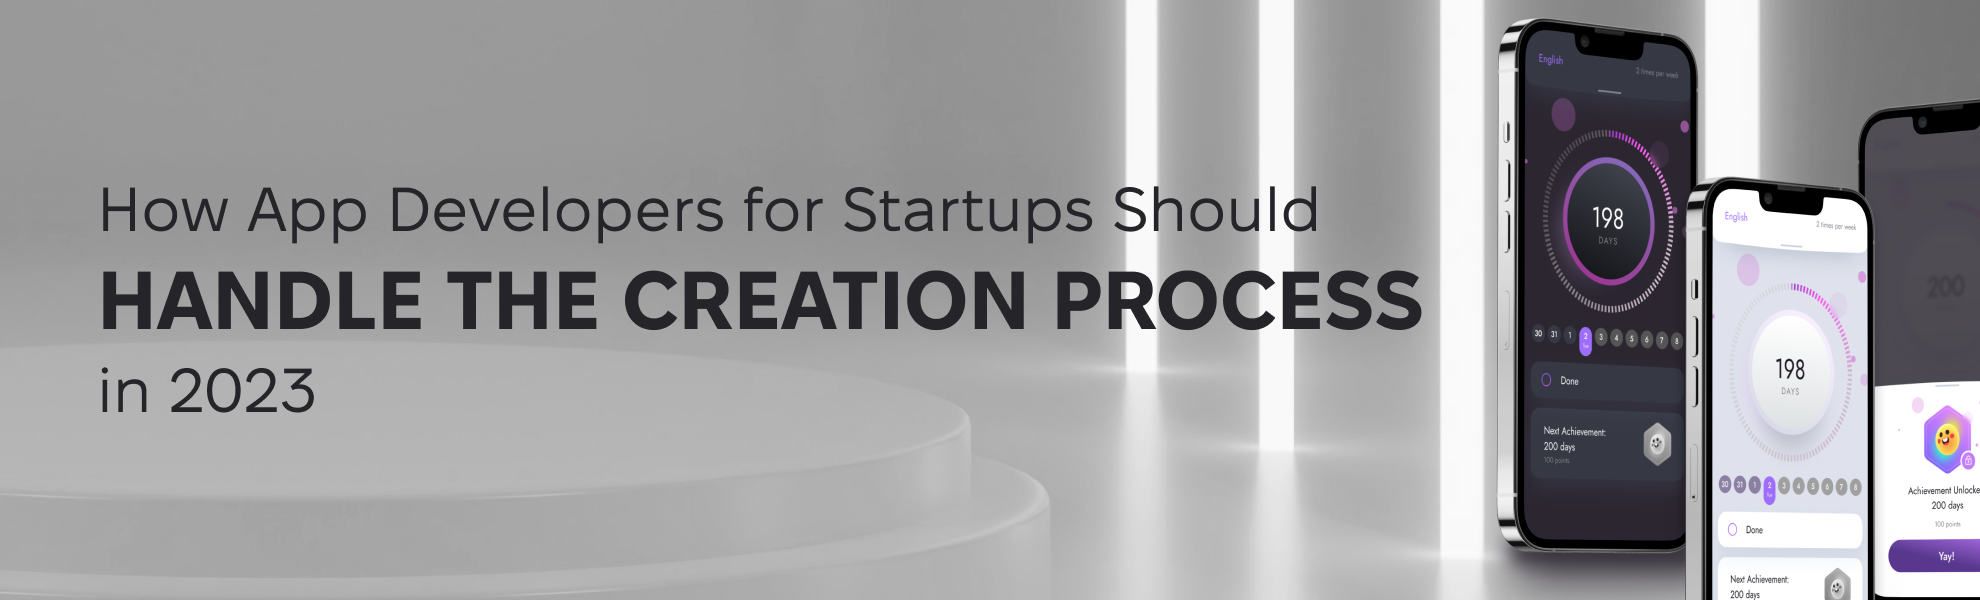 How App Developers for Startups Should Handle the Creation Process in 2023